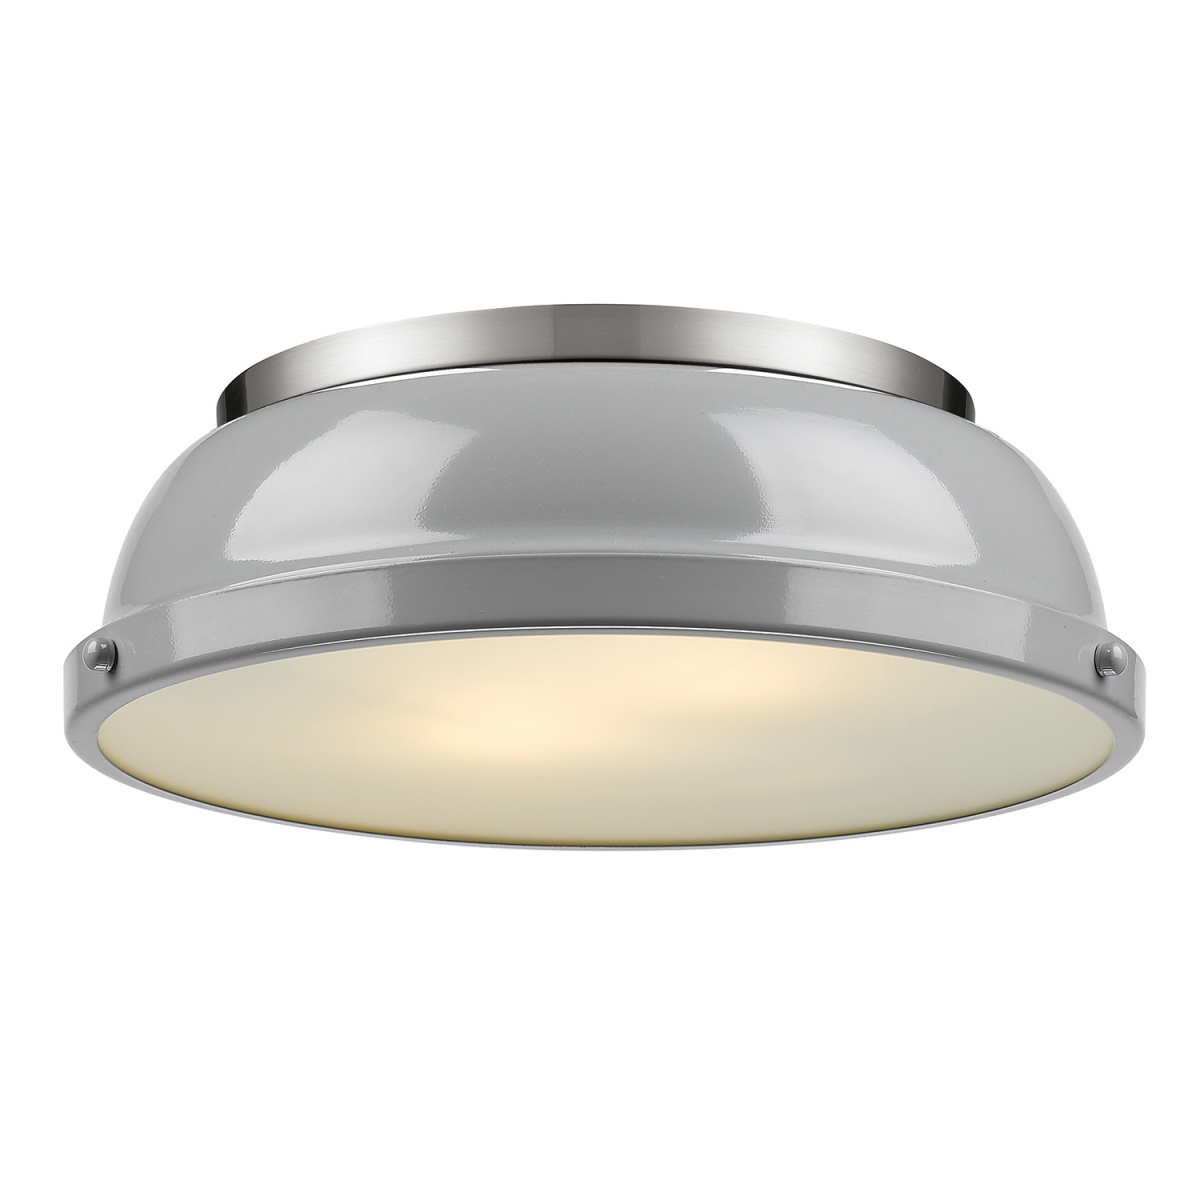 3602-14 Pw-gy Duncan 14 In. Flush Mount Light With Gray Shade, Pewter